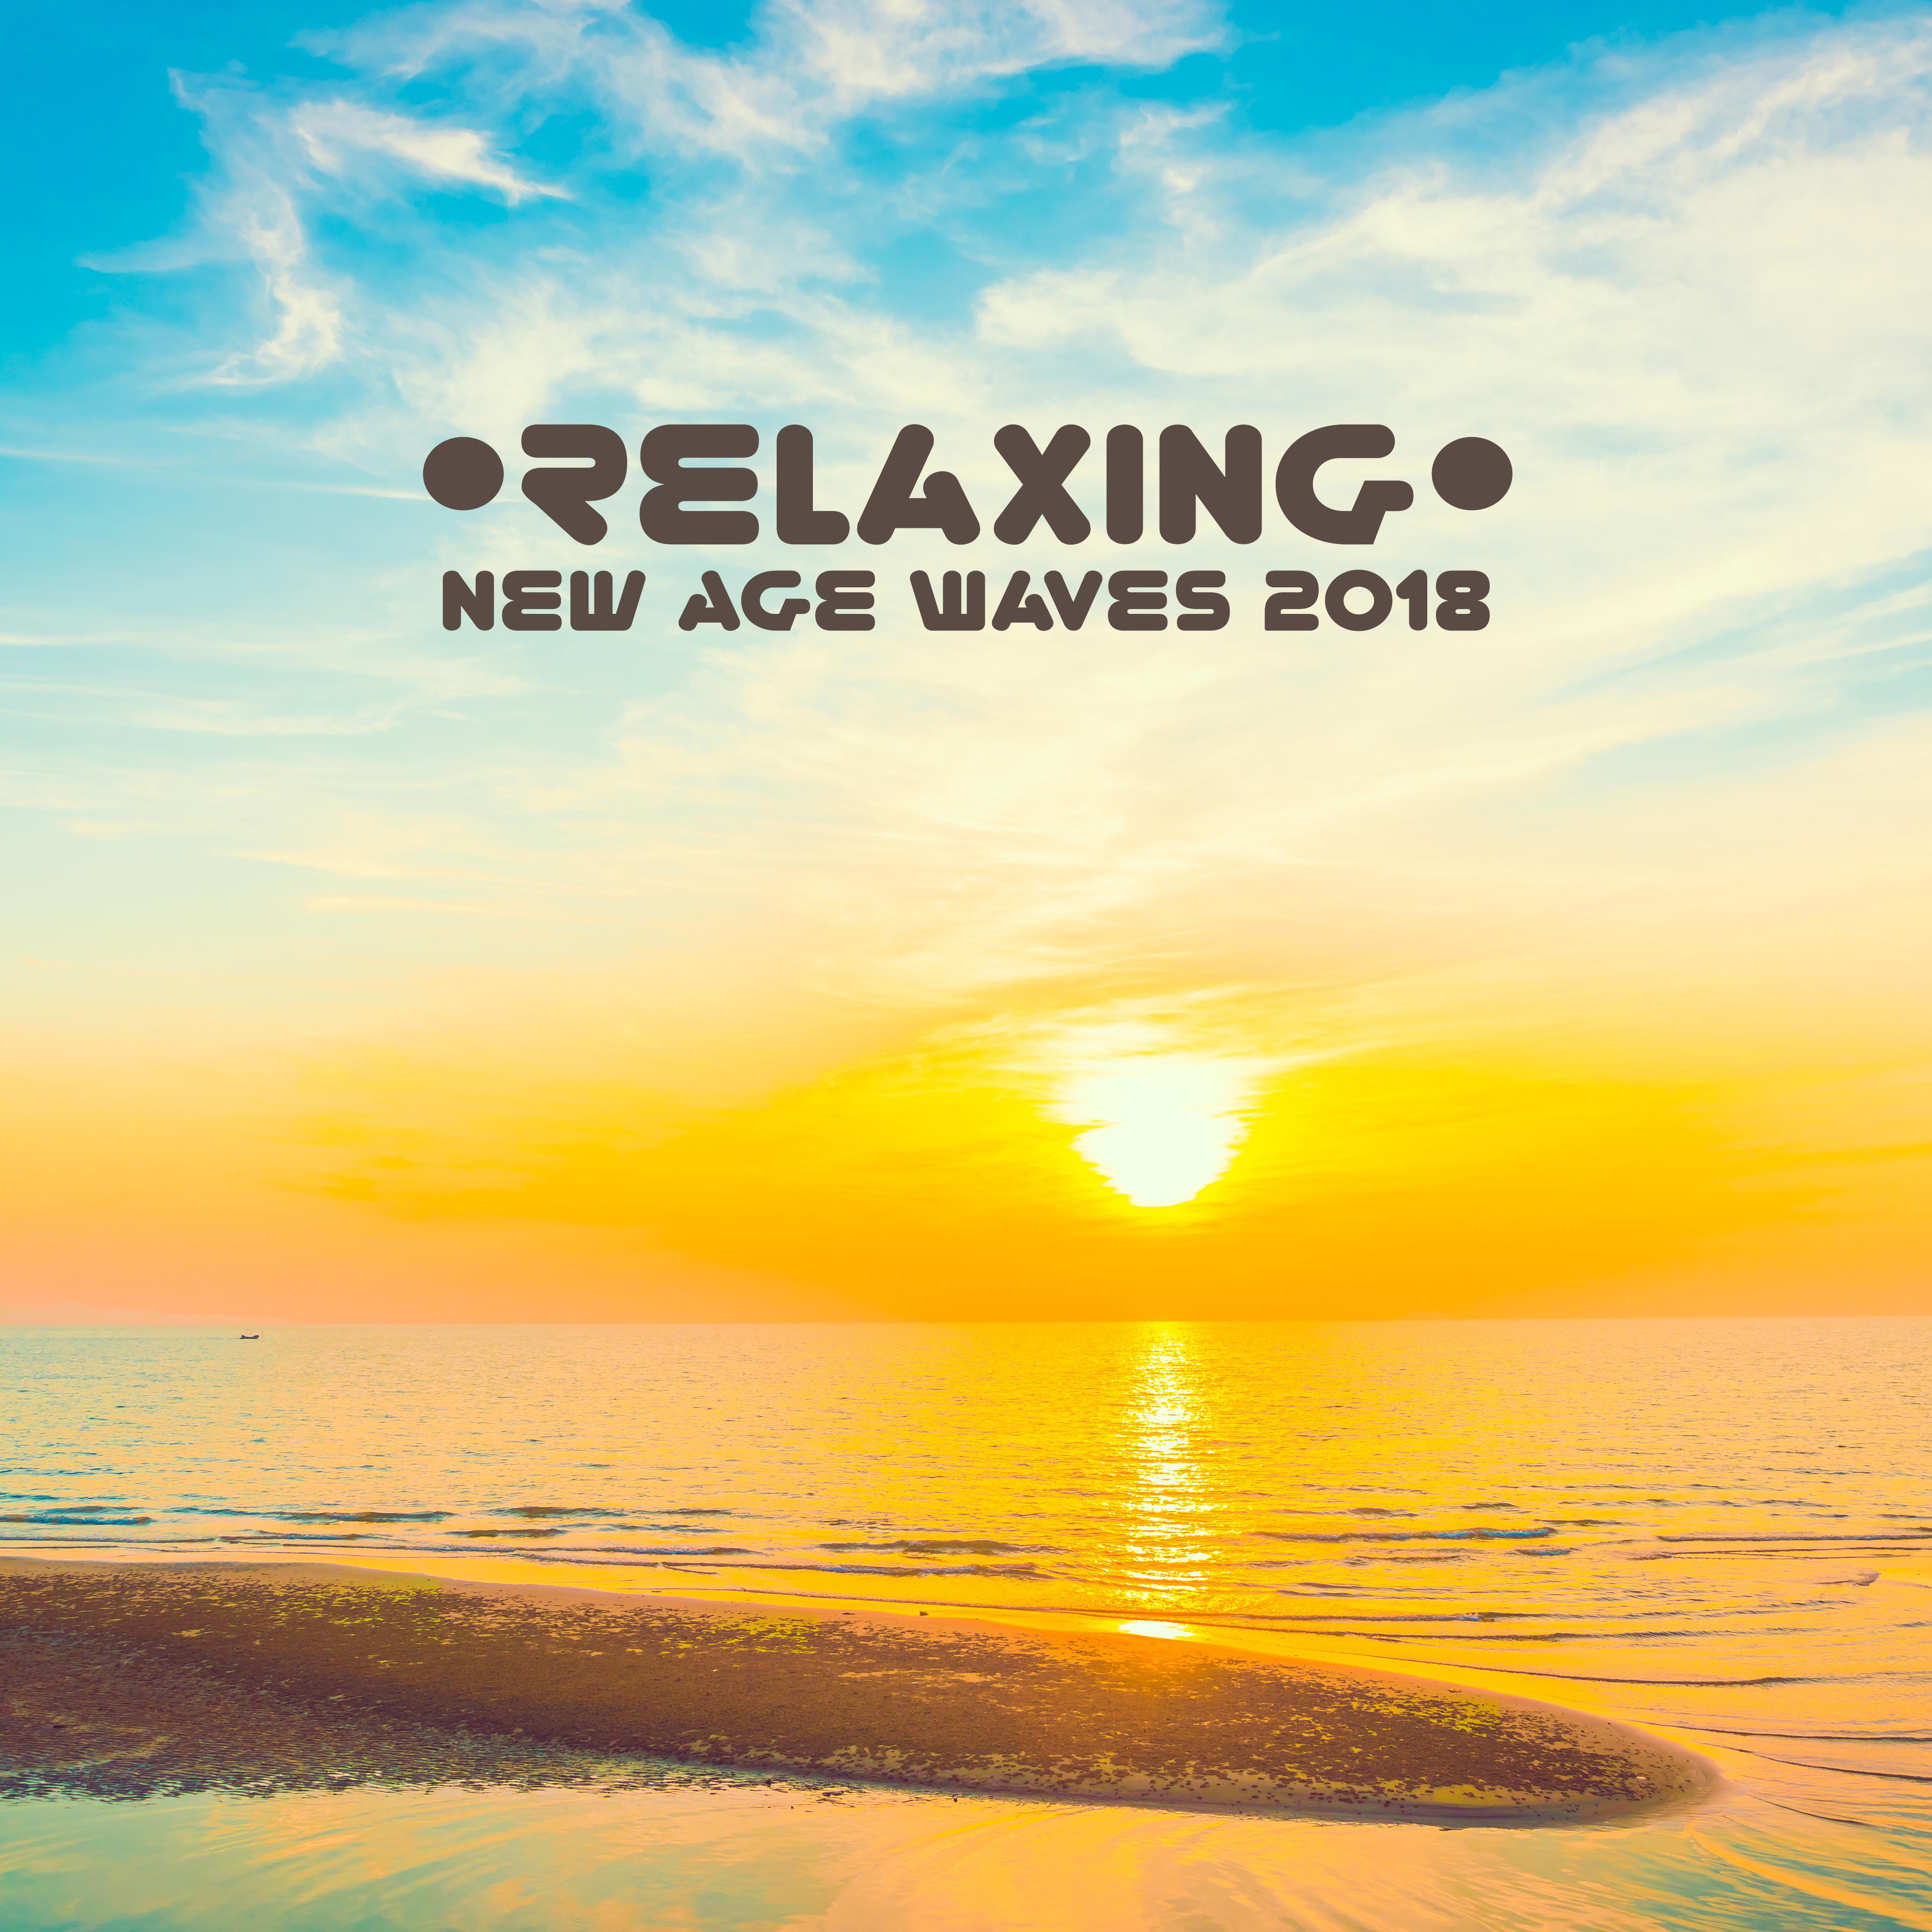 Relaxing New Age Waves 2018